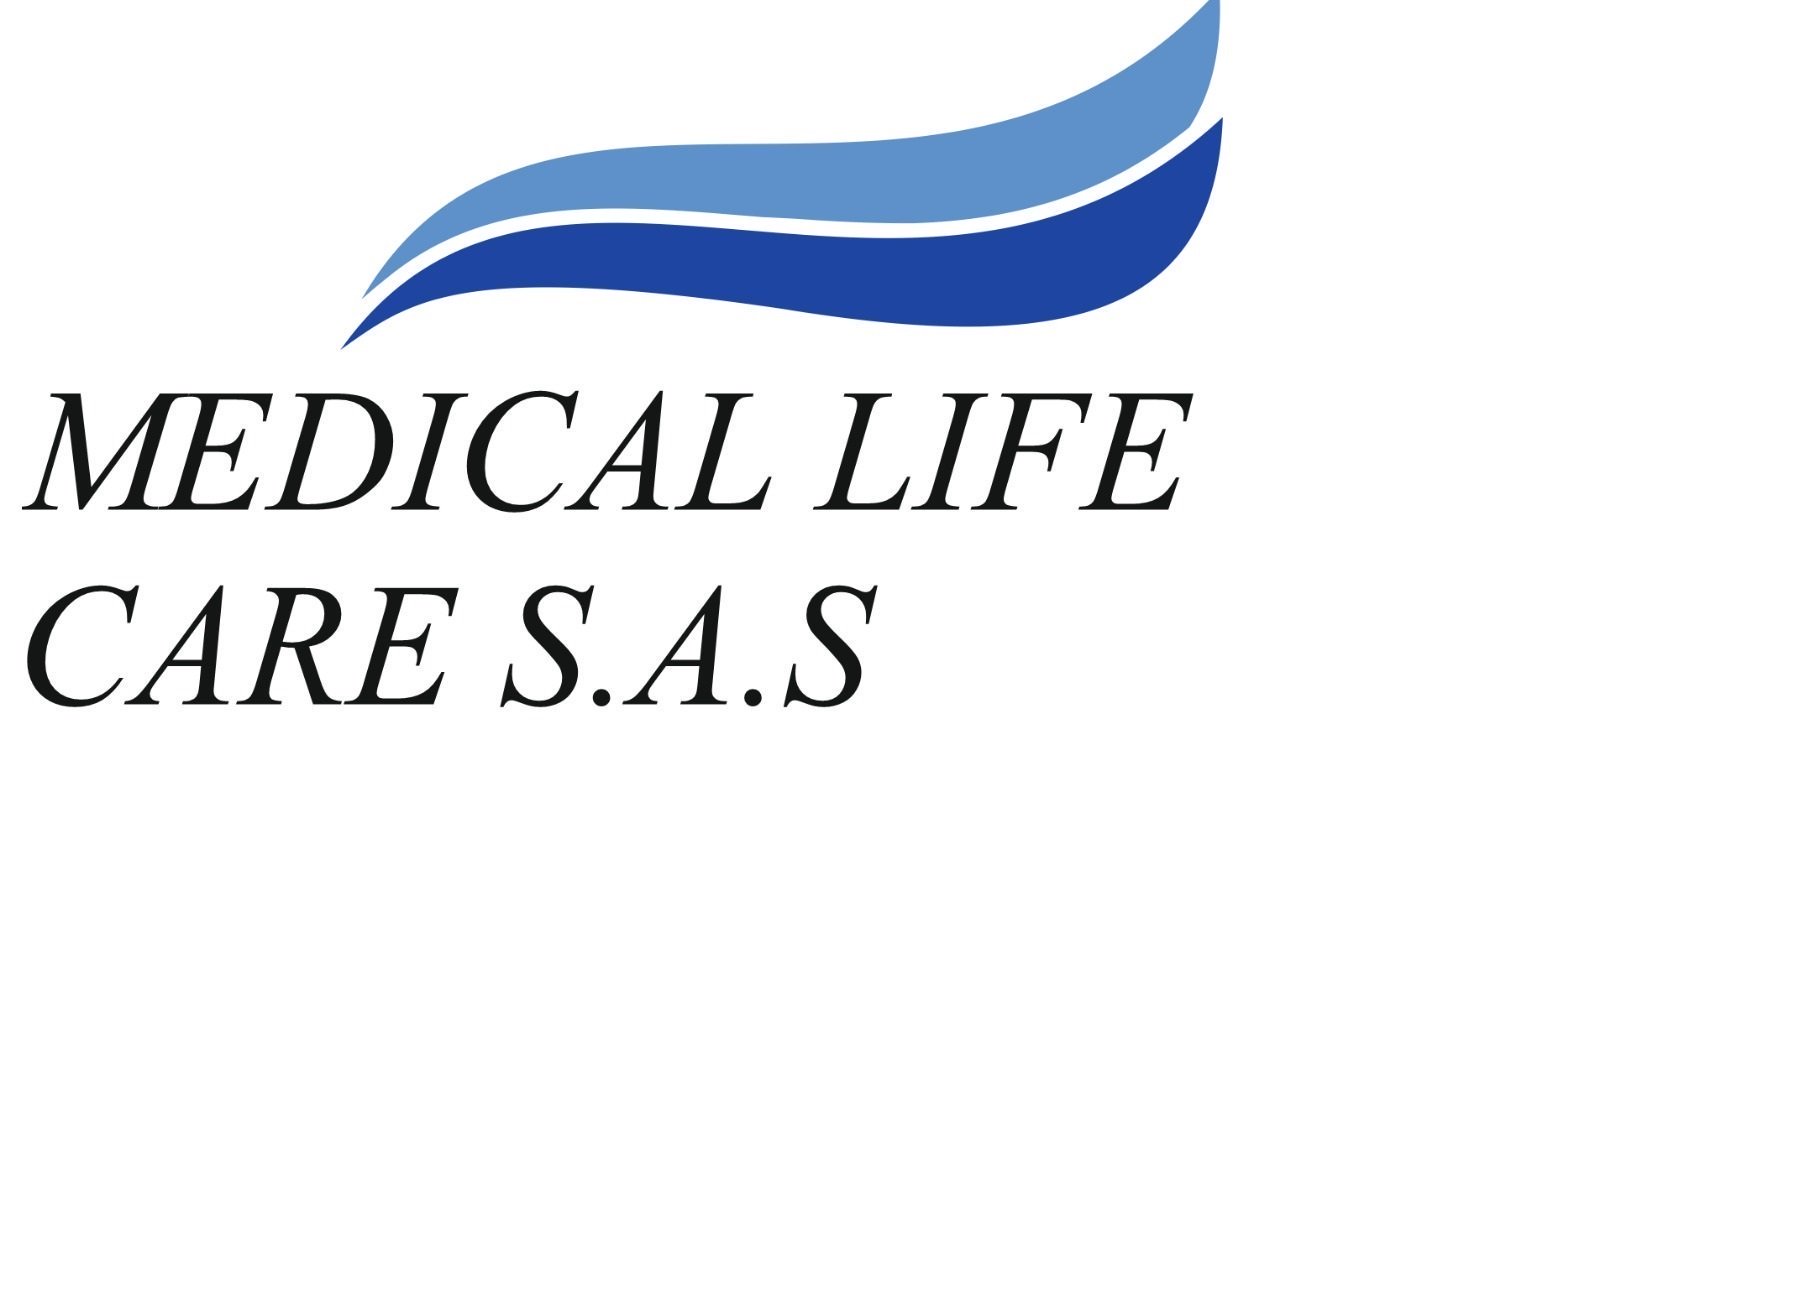 MEDICAL LIFE  CARE S.A.S.